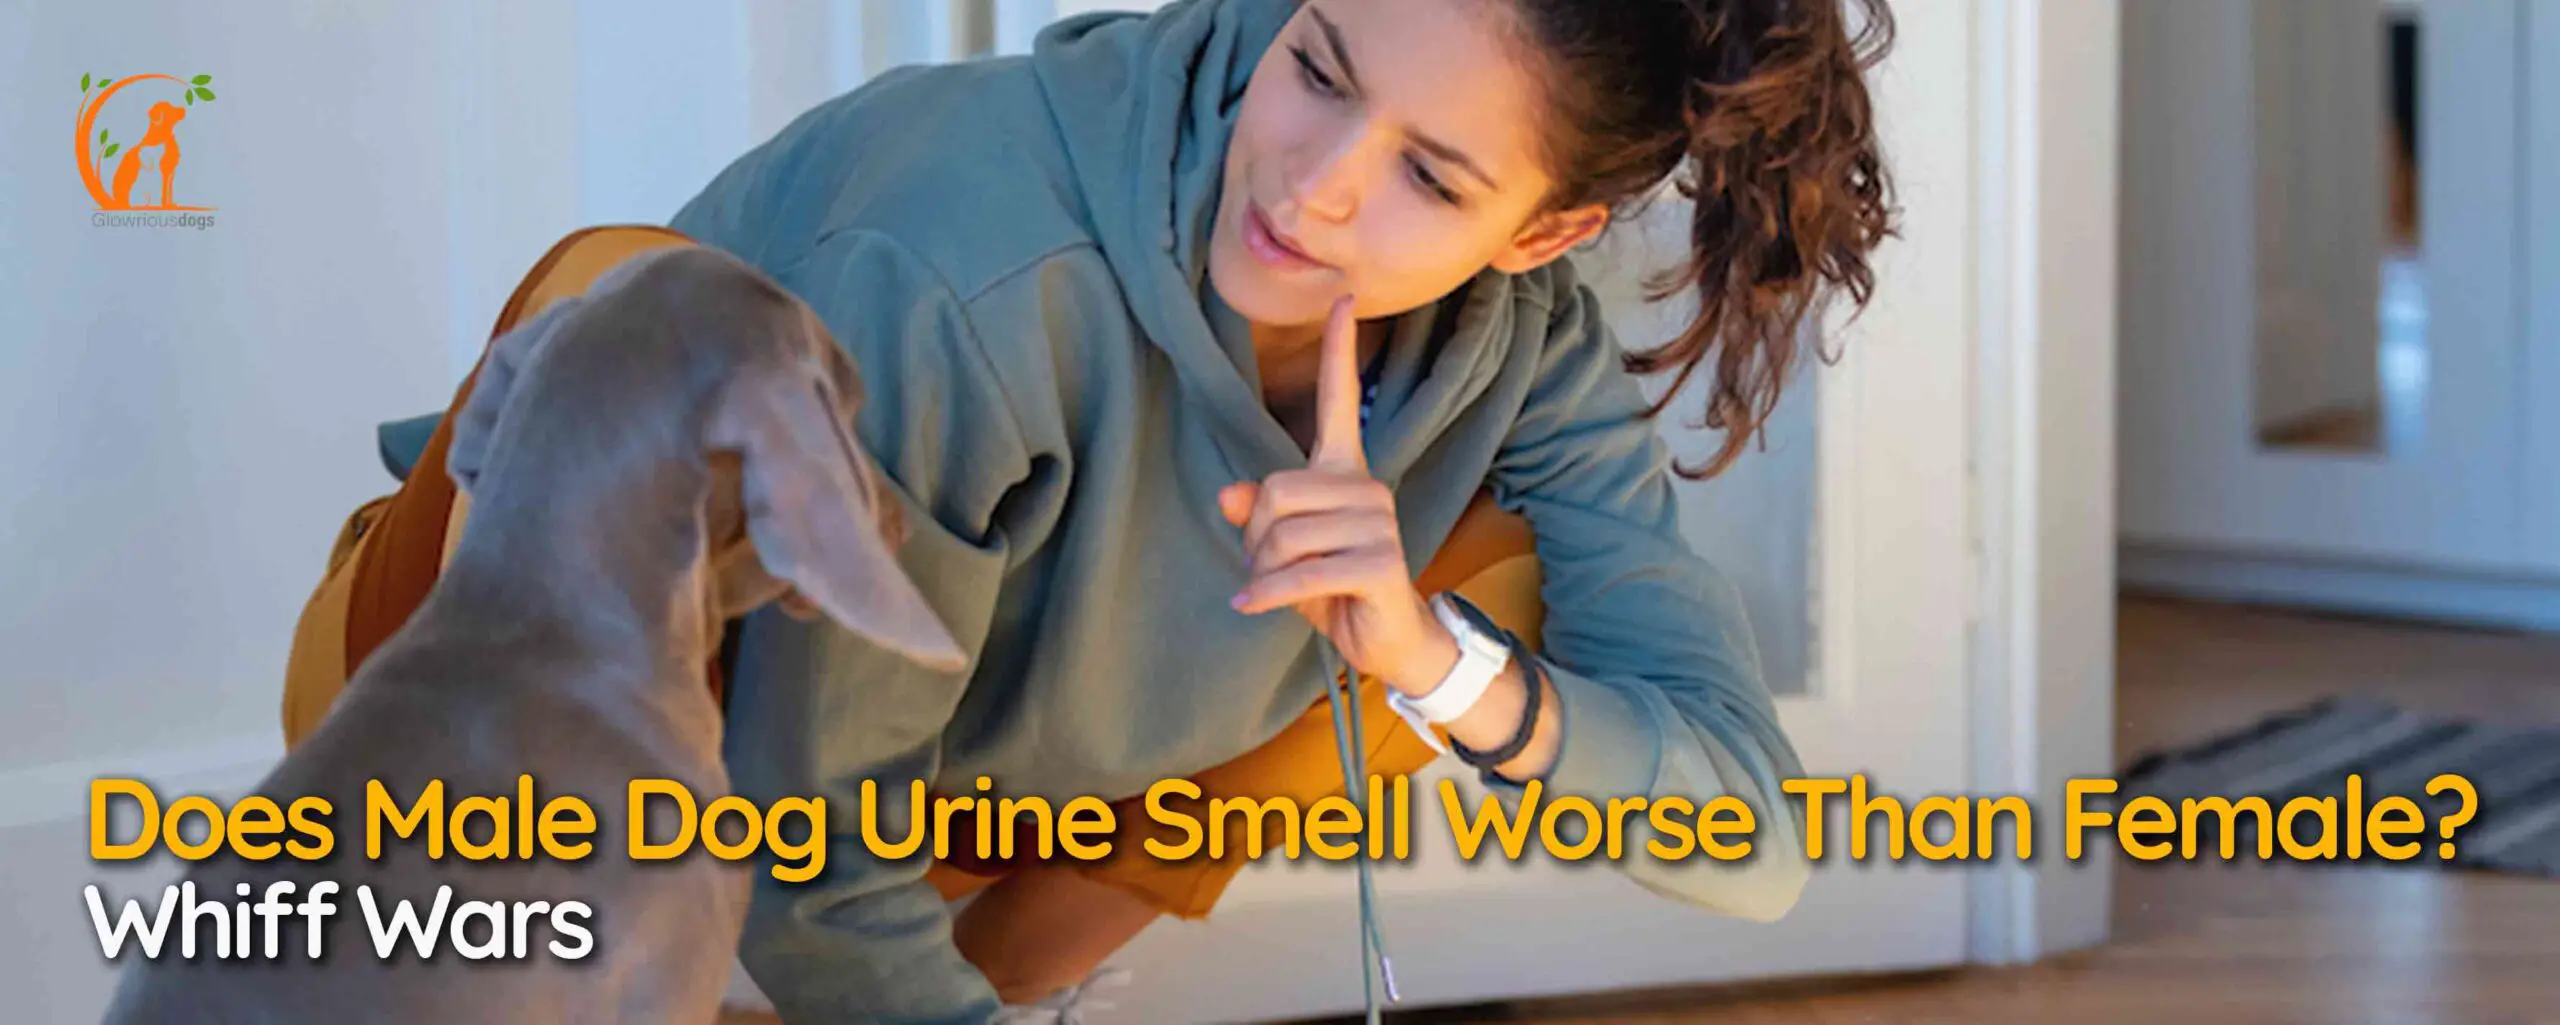 Does Male Dog Urine Smell Worse Than Female? Whiff Wars